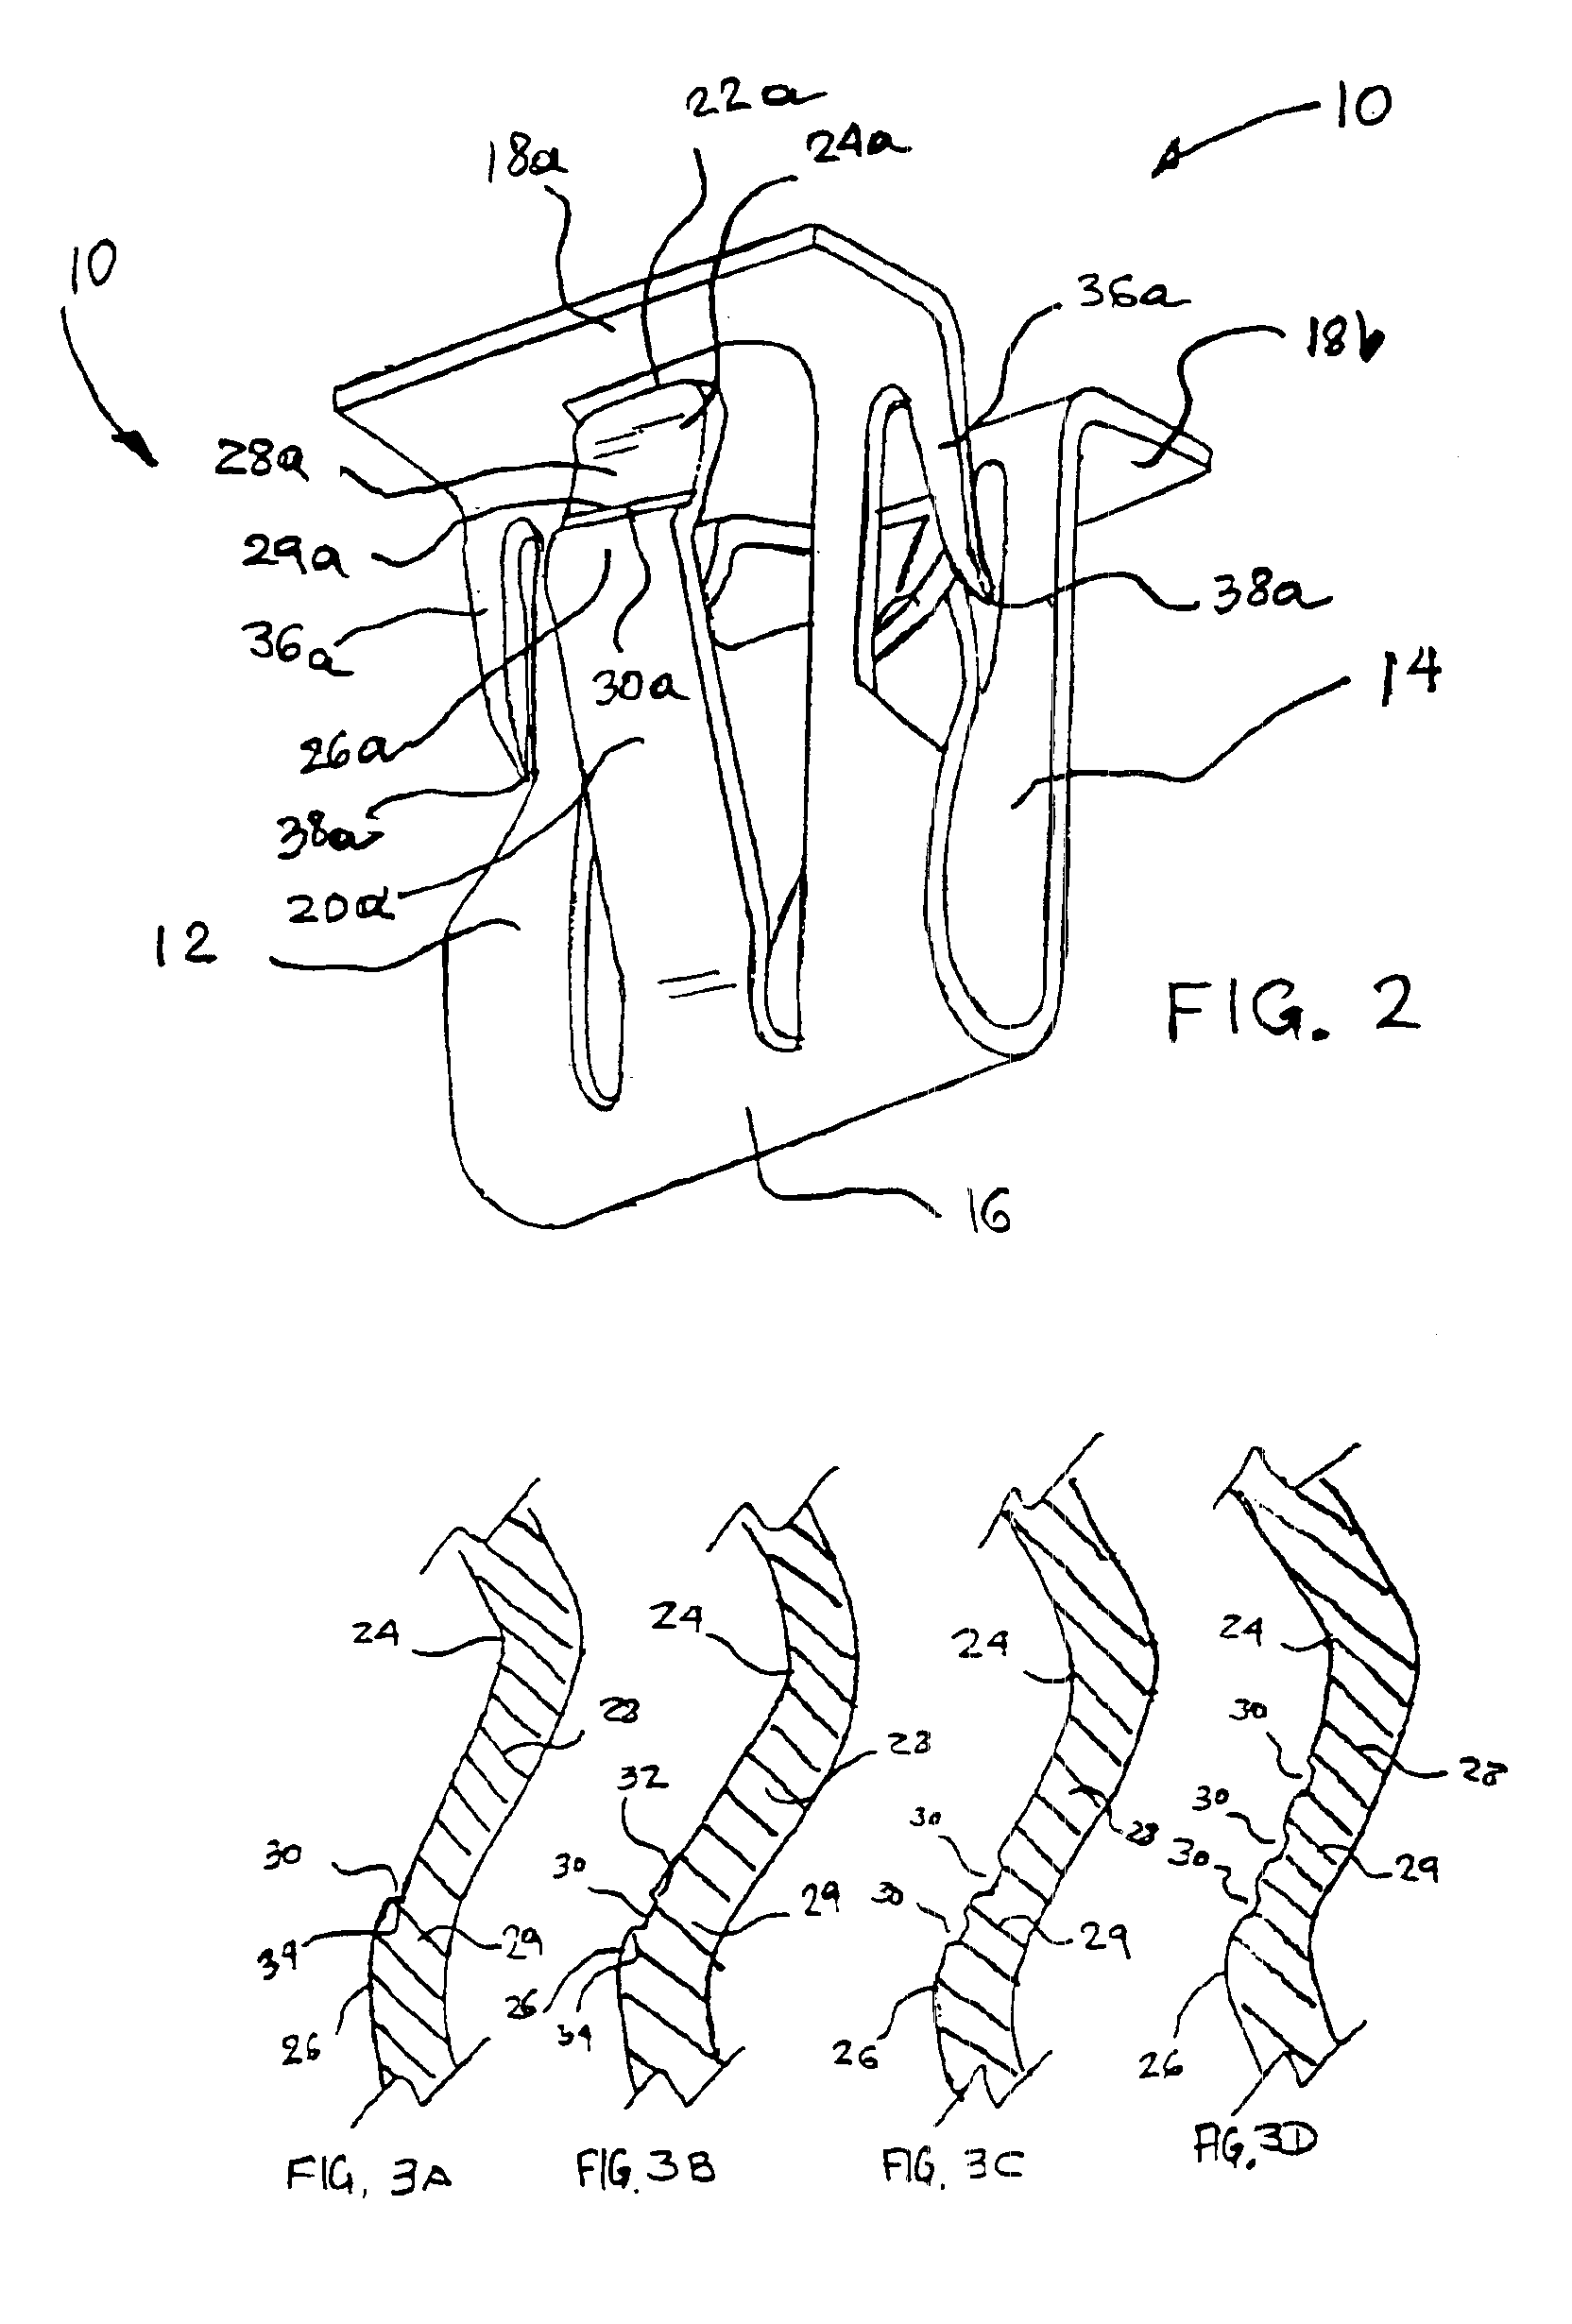 Assemblies comprising fastener with ergonomically balanced removal to insertion ratio